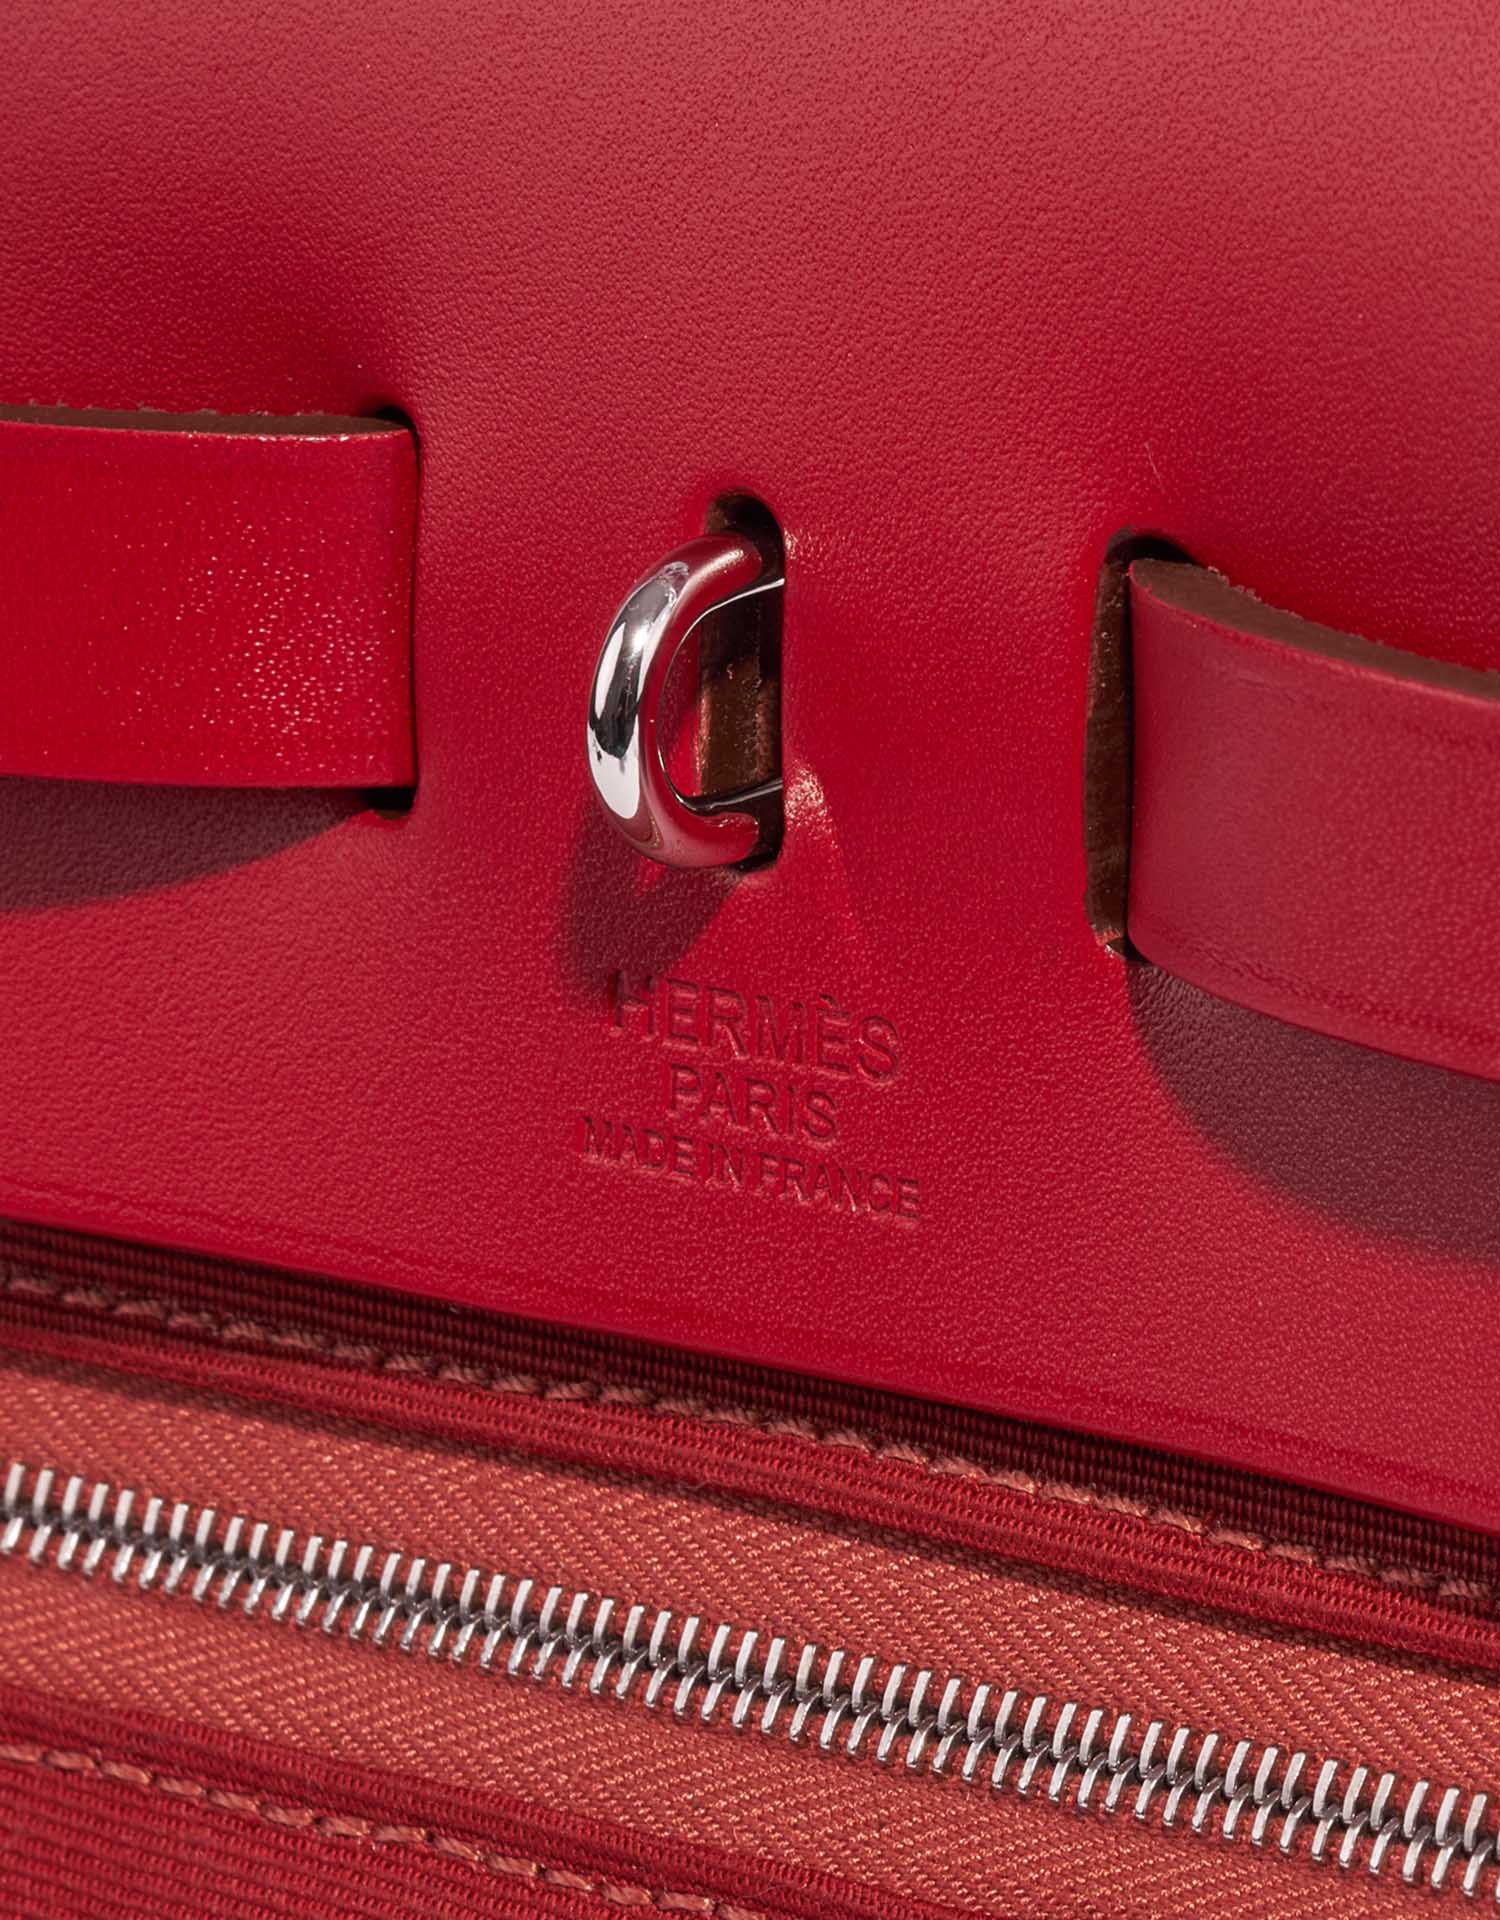 Hermes Herbag Zip 31 Rouge Venetian/Rouge Piment/Rose Extreme Toile H and  Vache Hunter Palladium Hardware